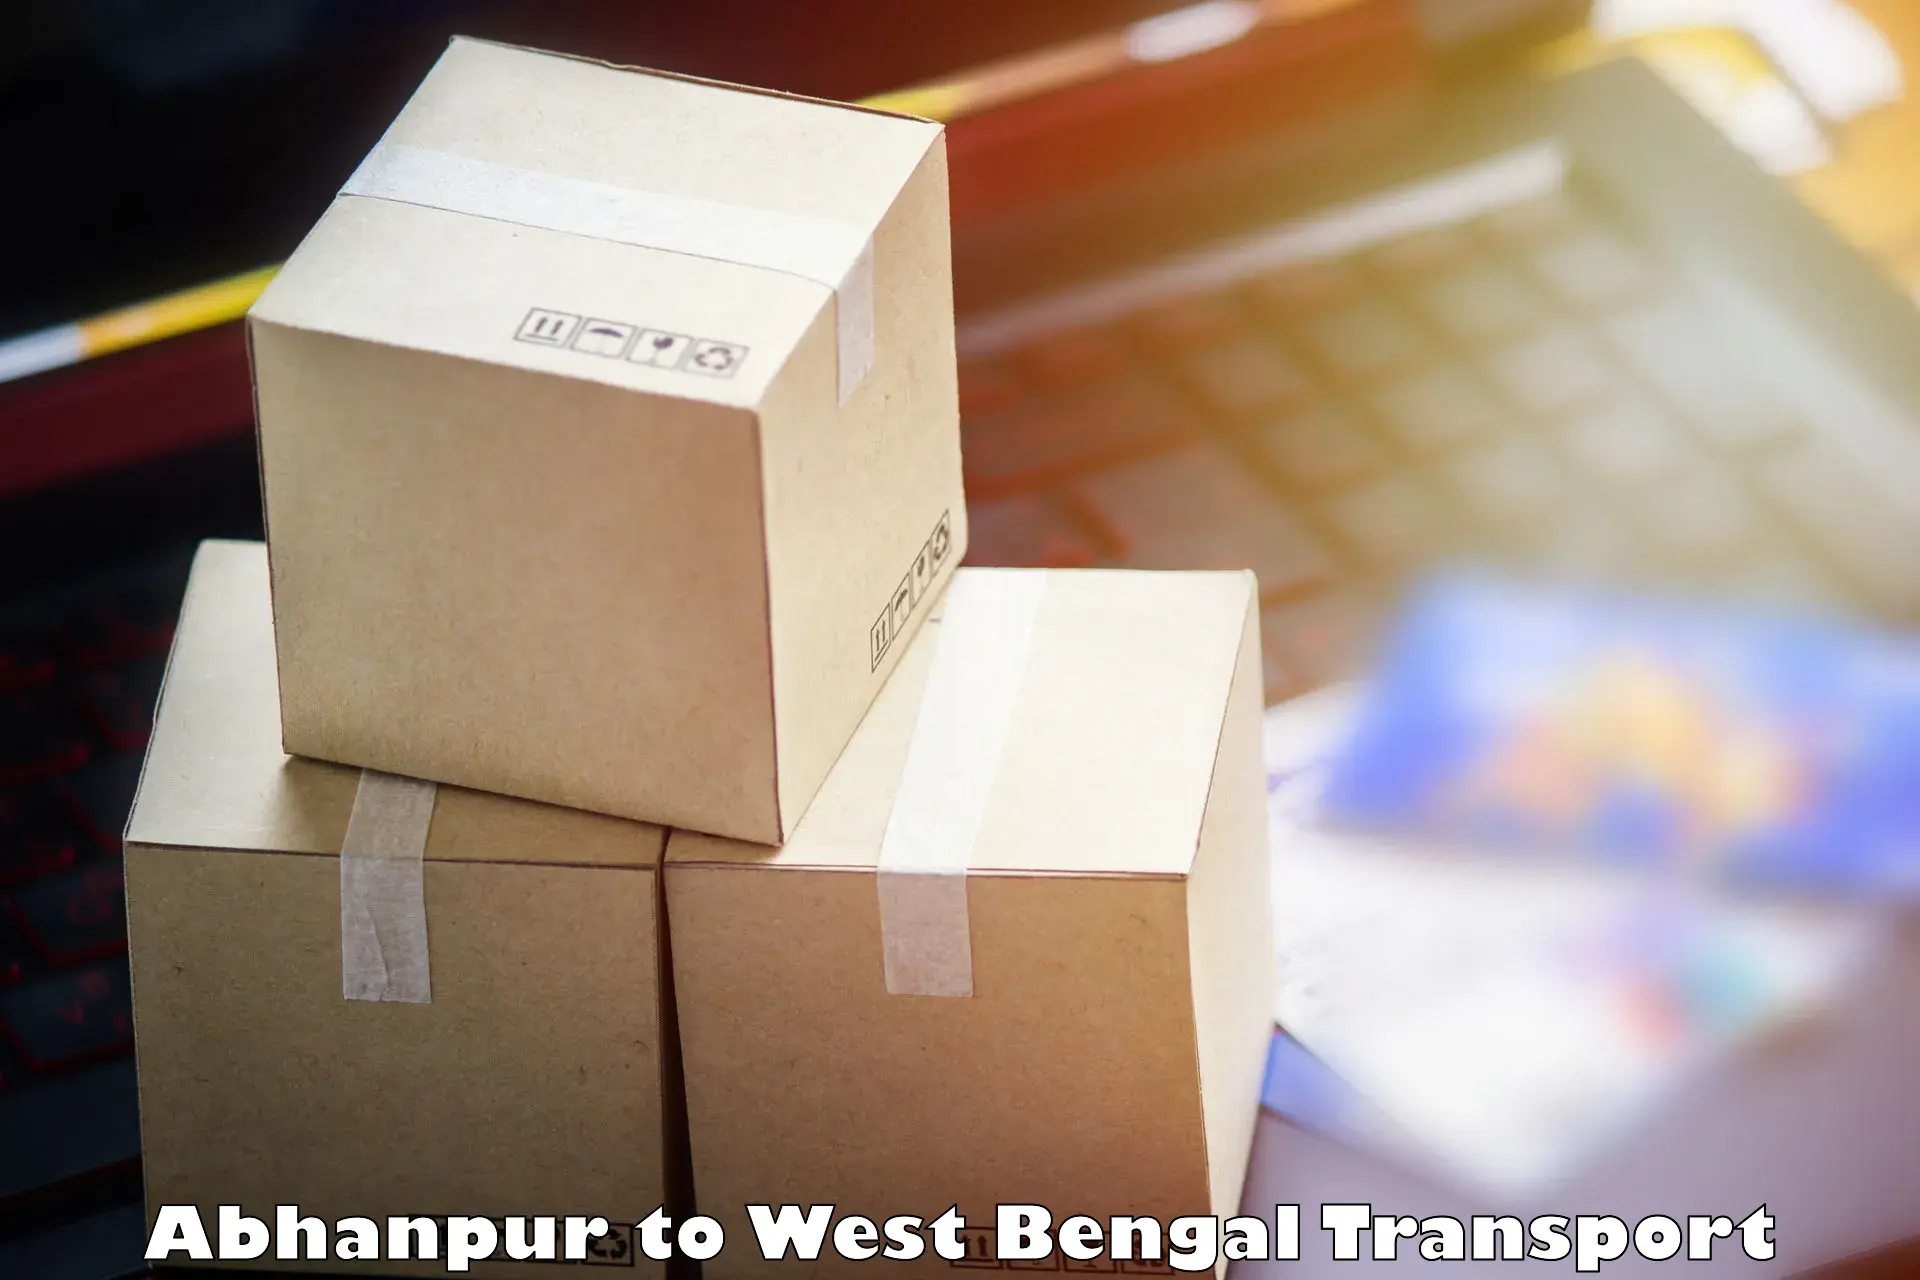 Cargo train transport services Abhanpur to Bongaon